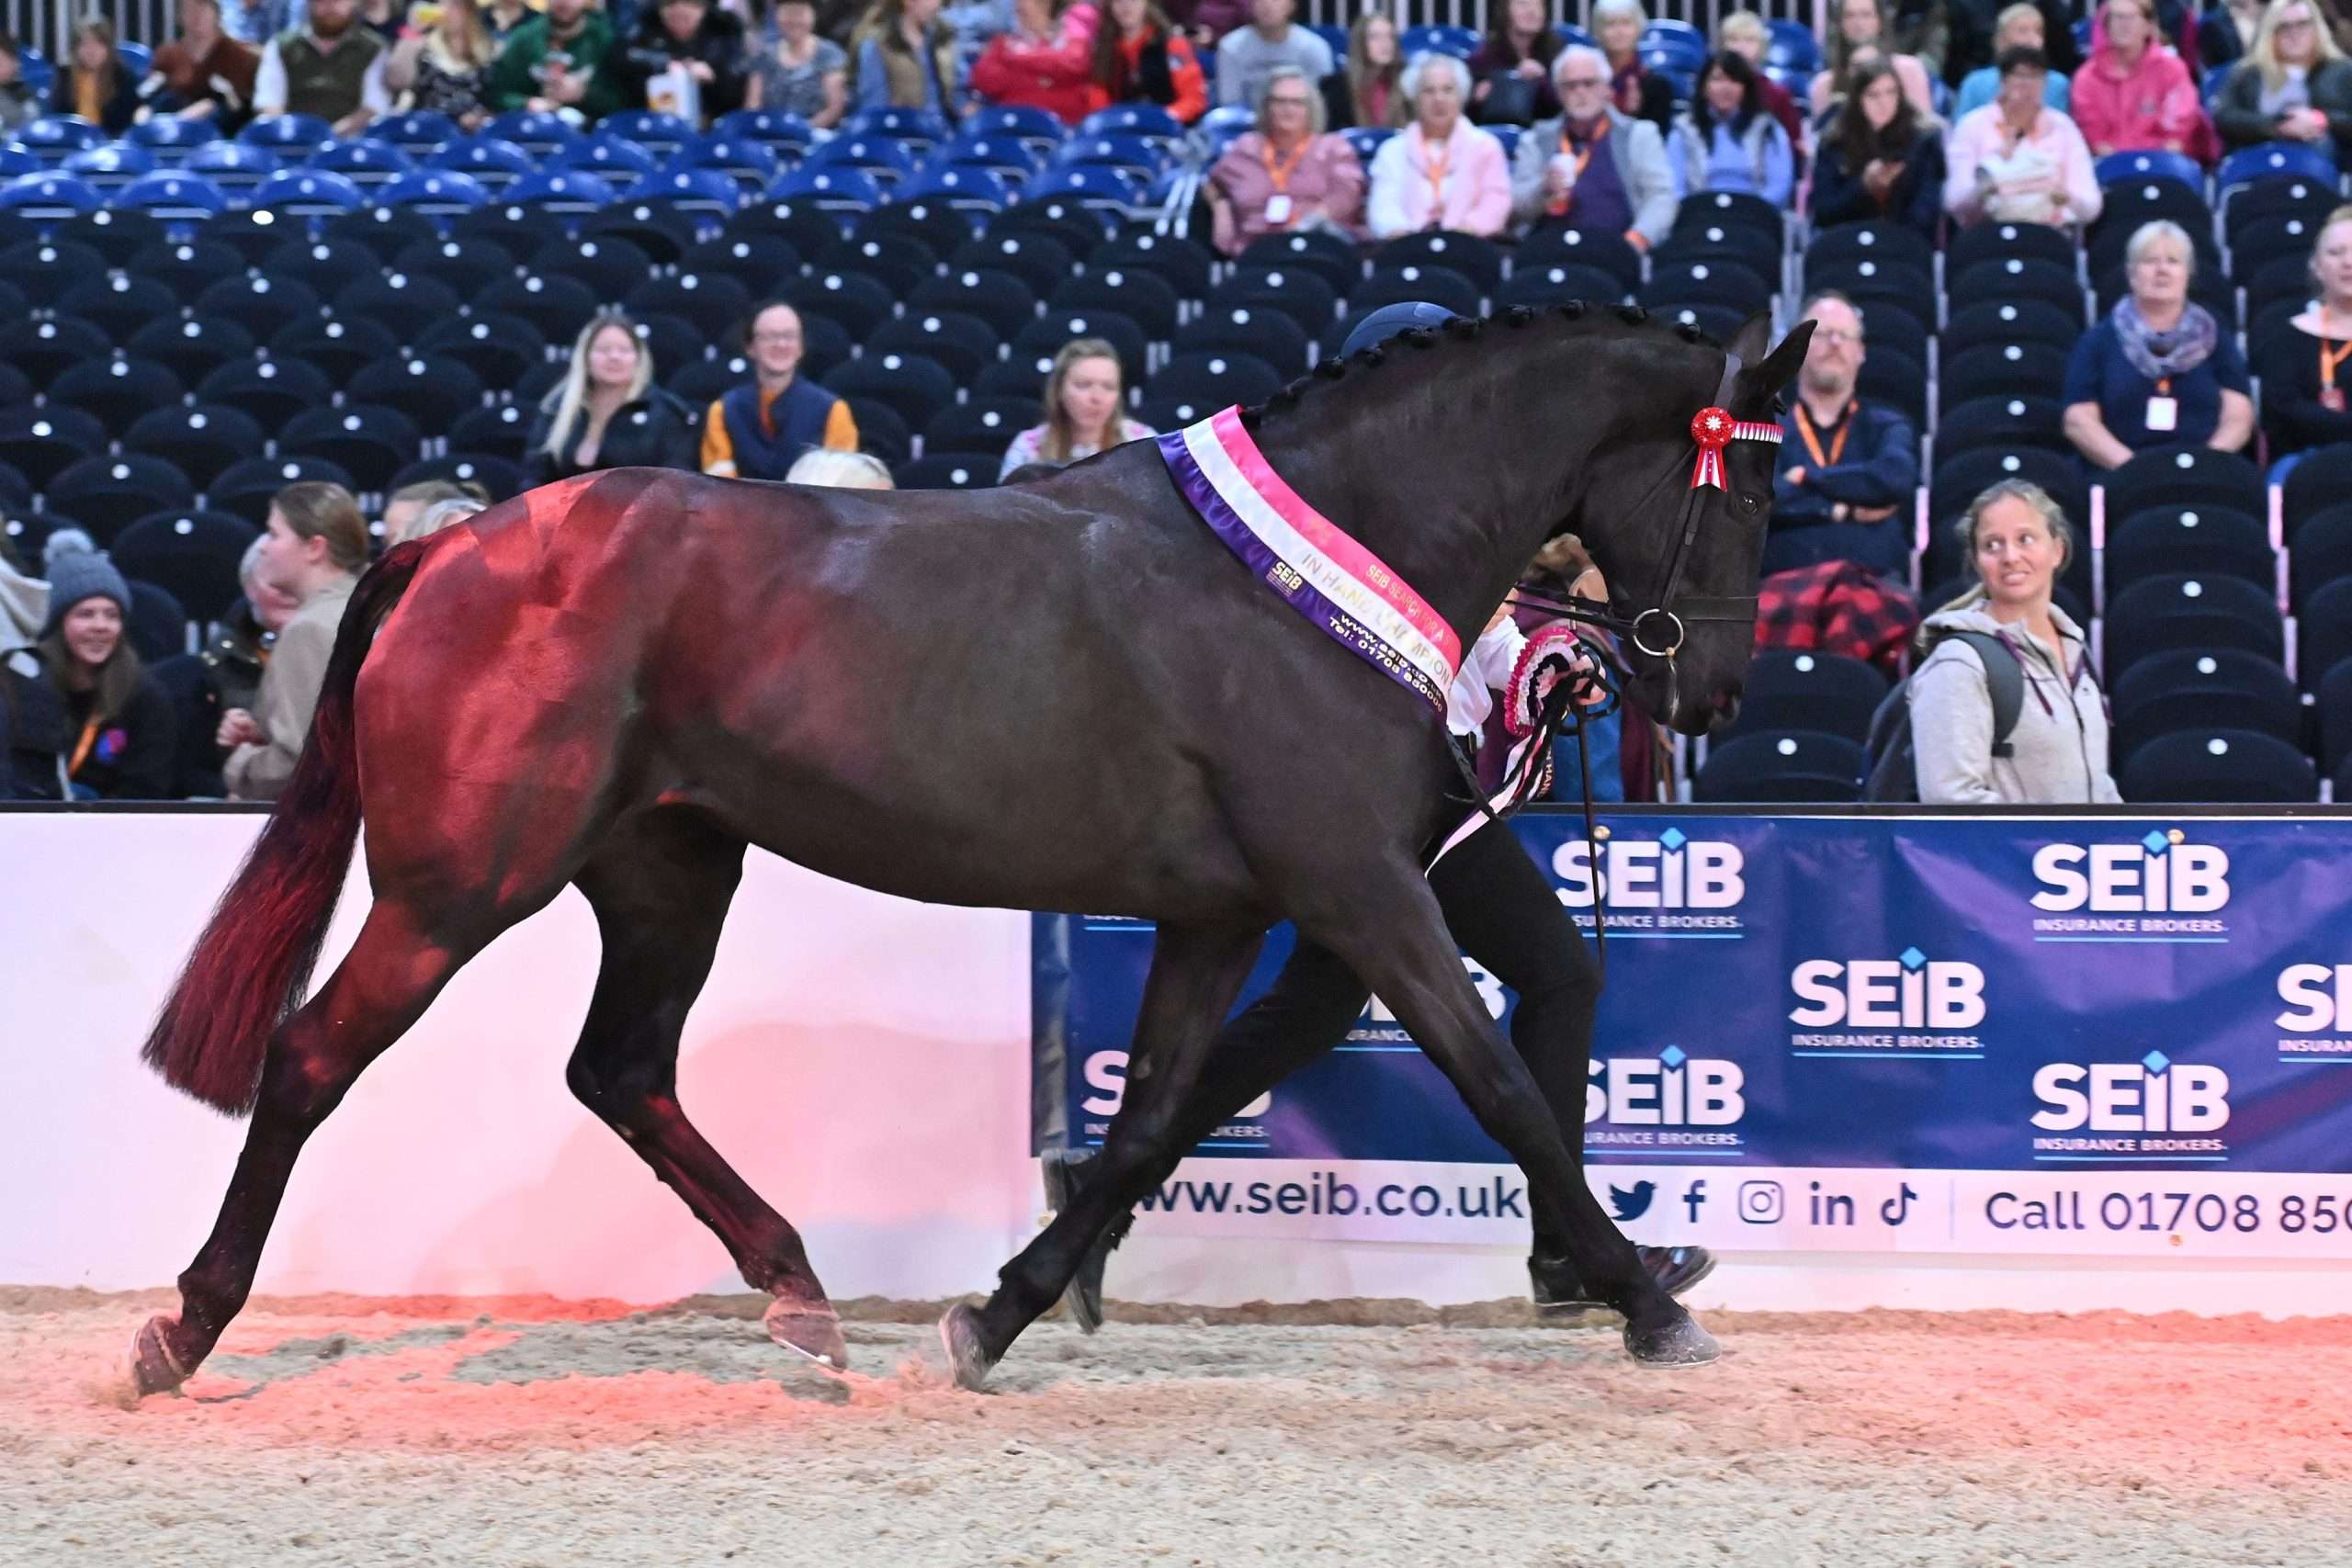 Finn Williamson and Kirsty Wilson’s dark bay mare Port Lou Lou took the in-hand championship title. Image credit SMR Photography